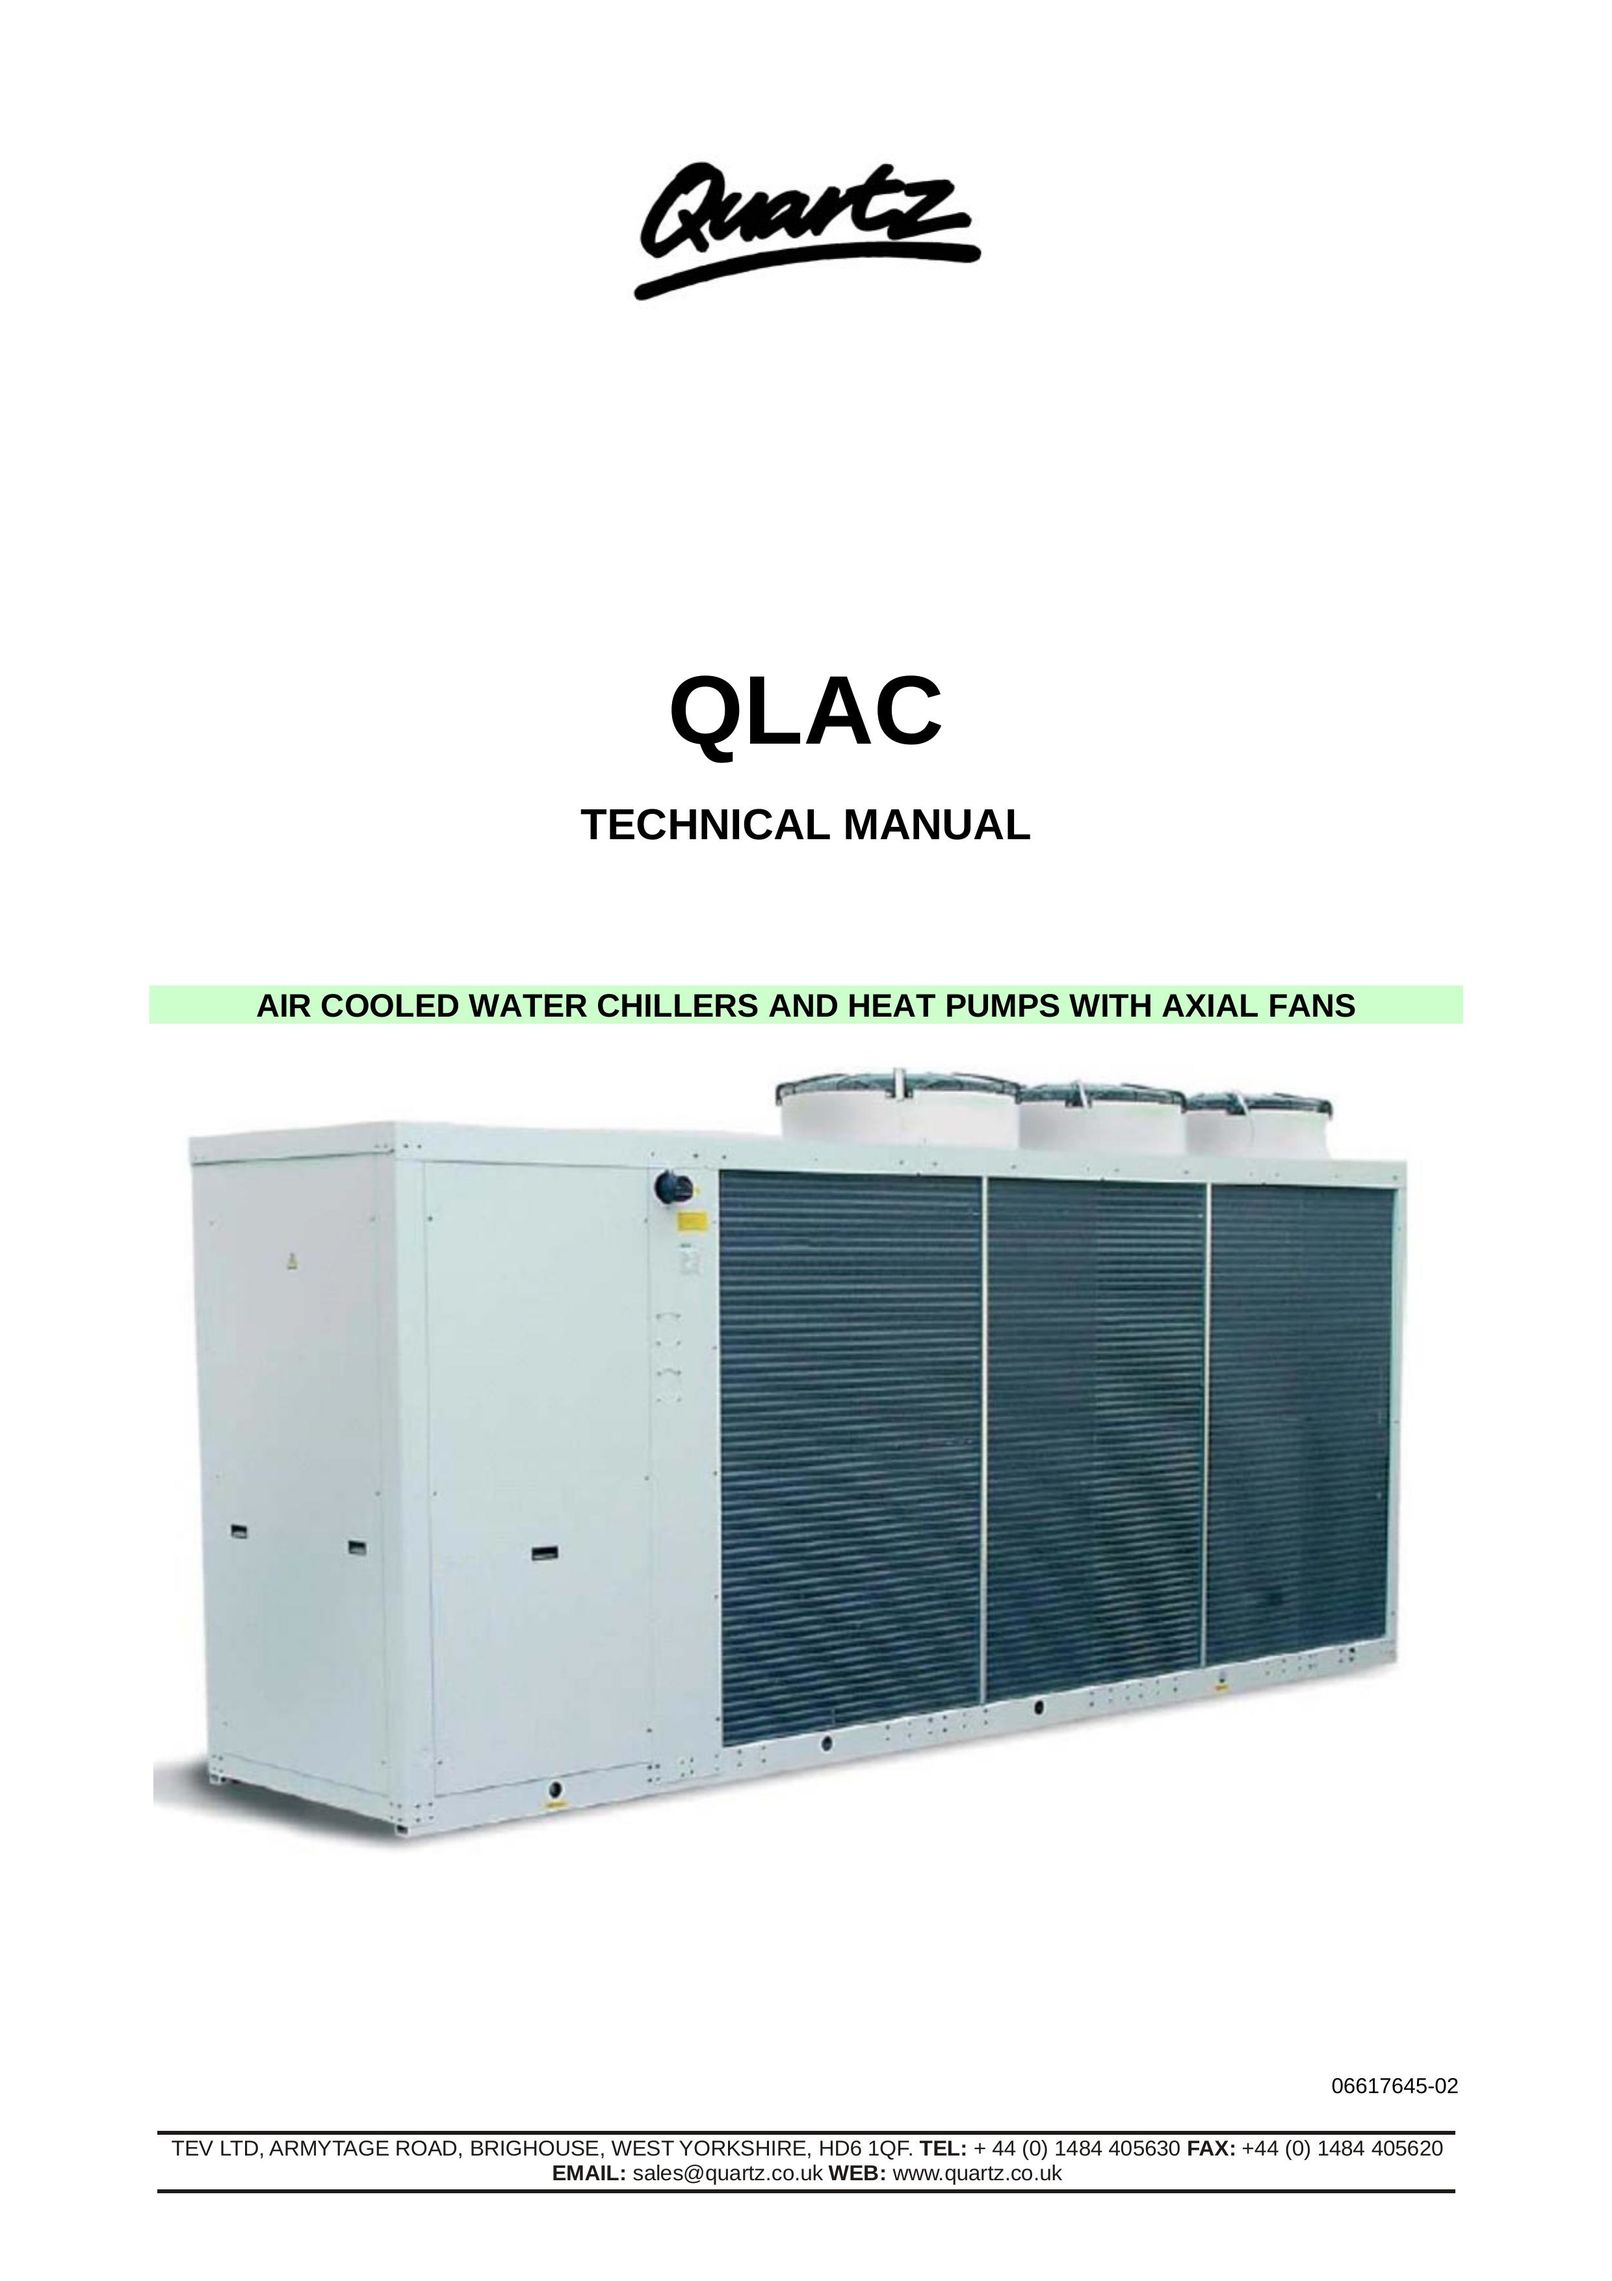 Quartz TECHNICAL MANUAL AIR COOLED WATER CHILLERS AND HEAT PUMPS WITH AXIAL FANS Water Heater User Manual